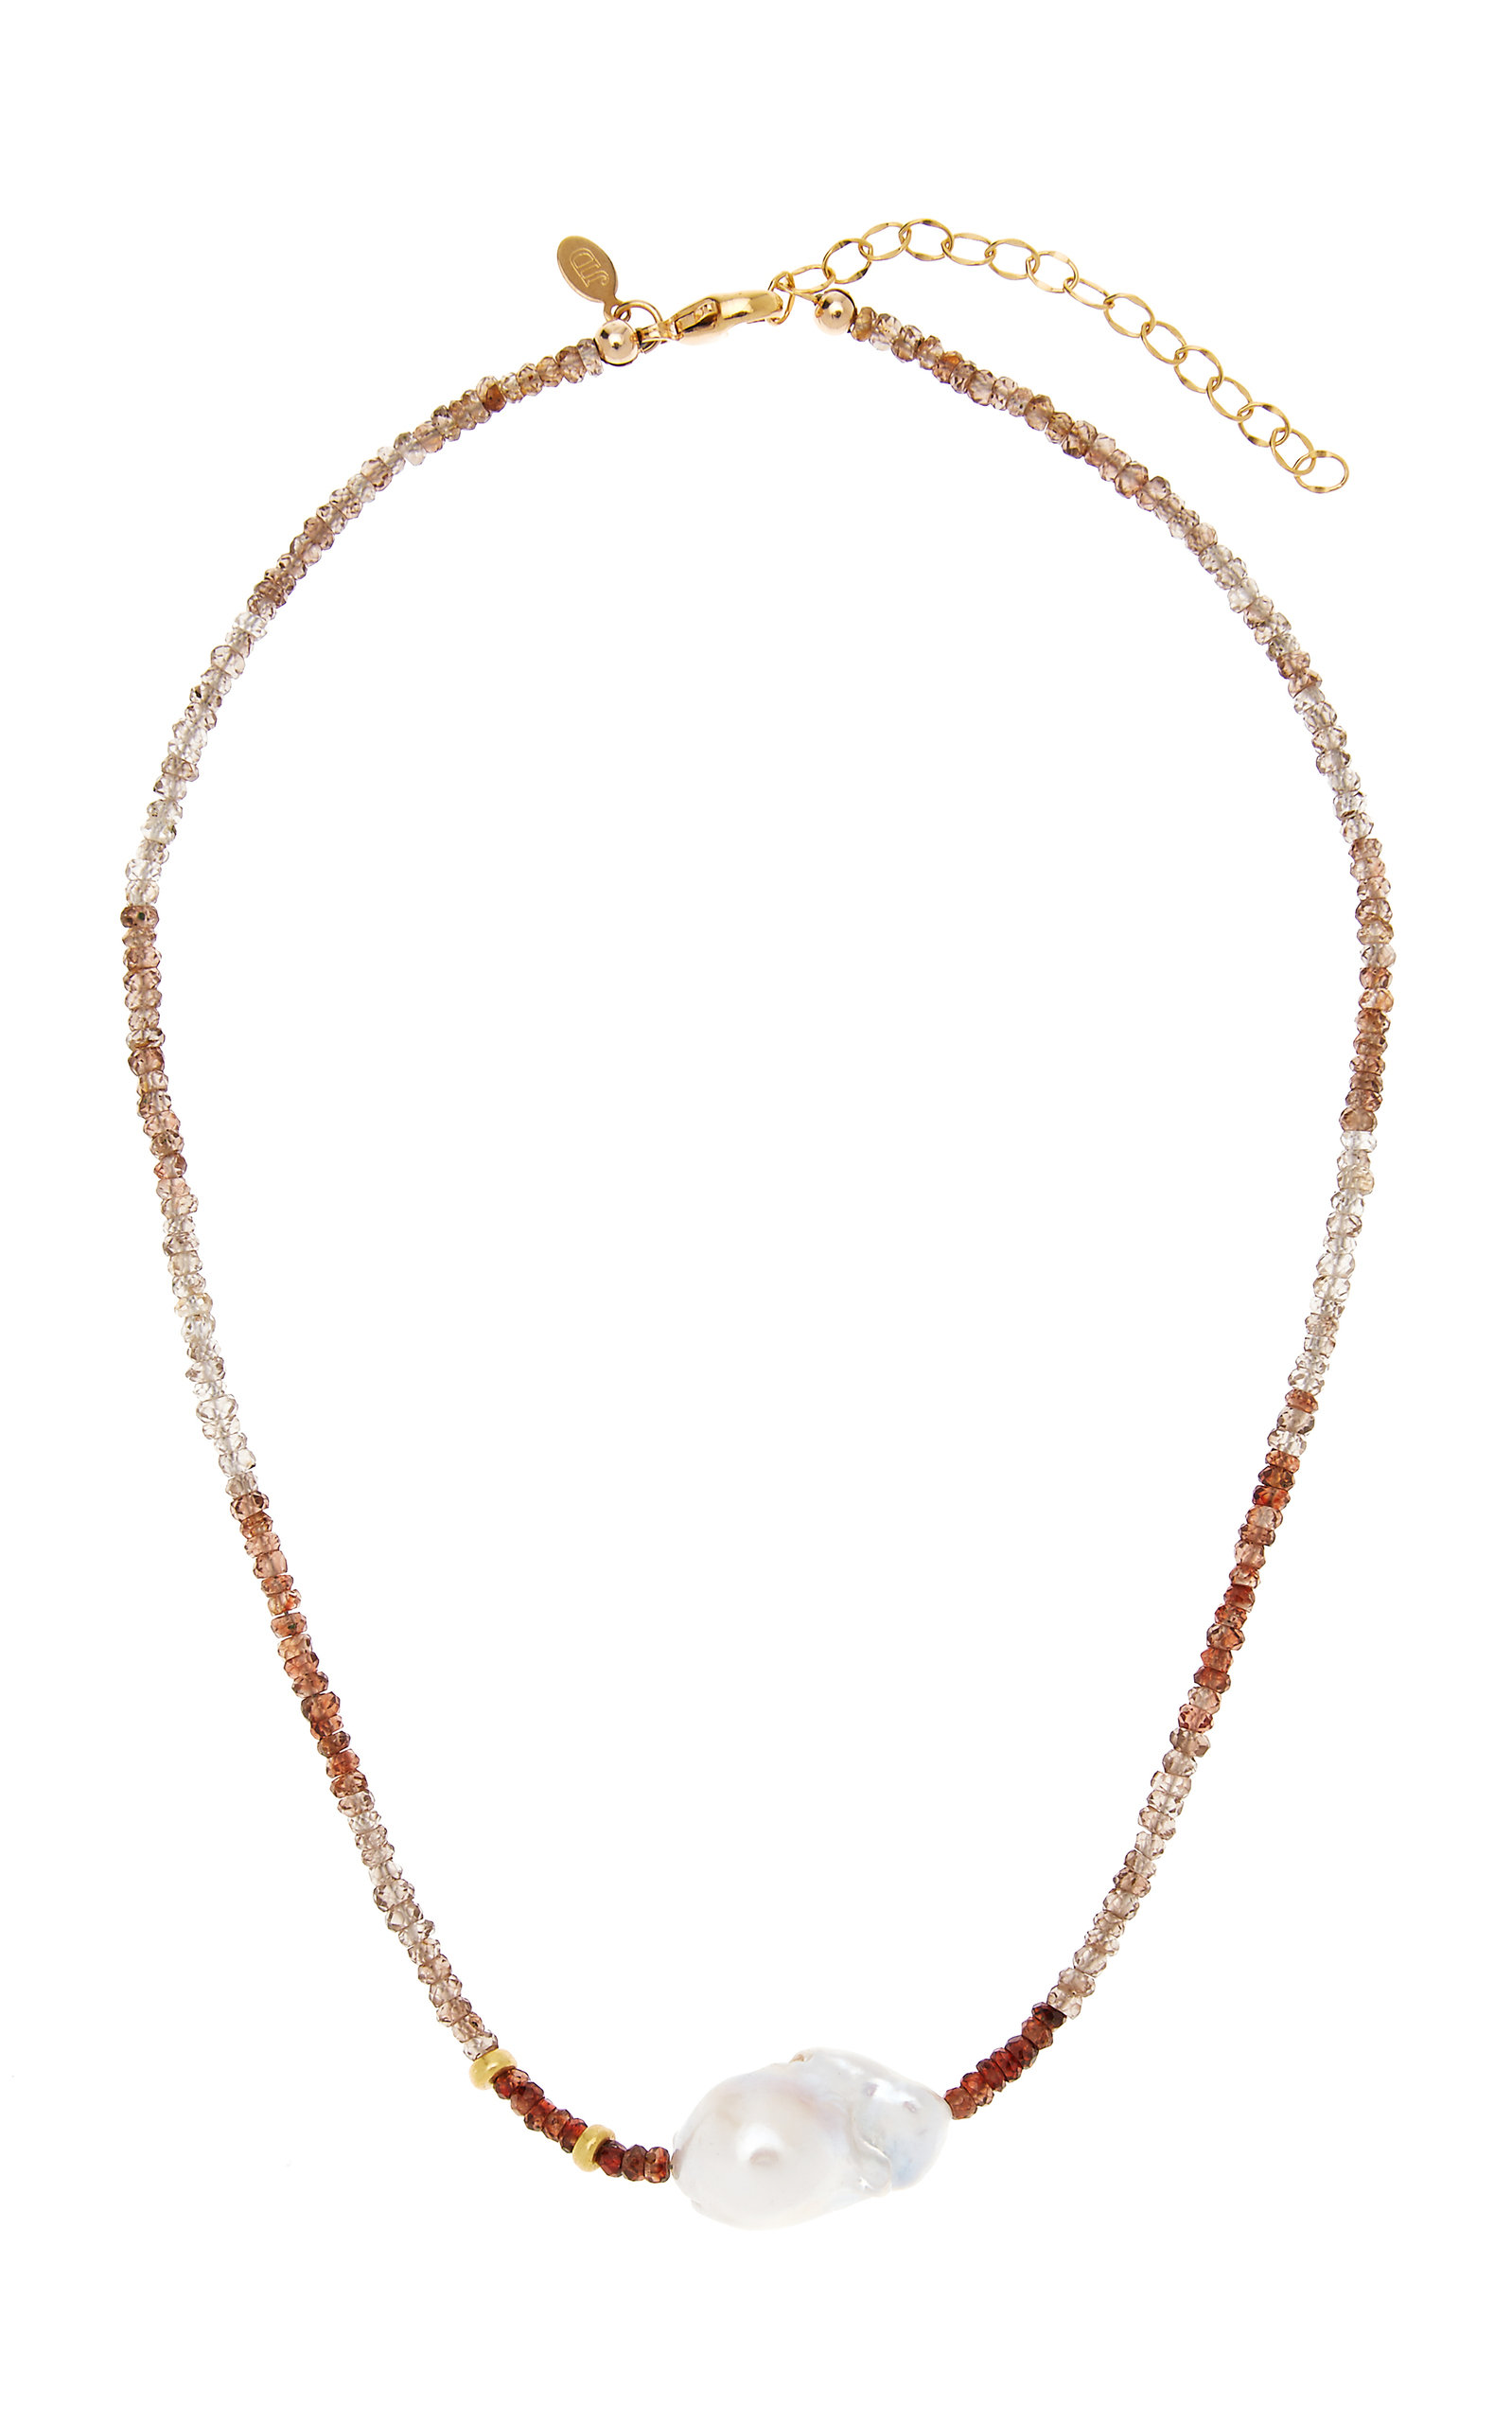 Joie DiGiovanni Women's Exclusive Pearl Beaded Necklace